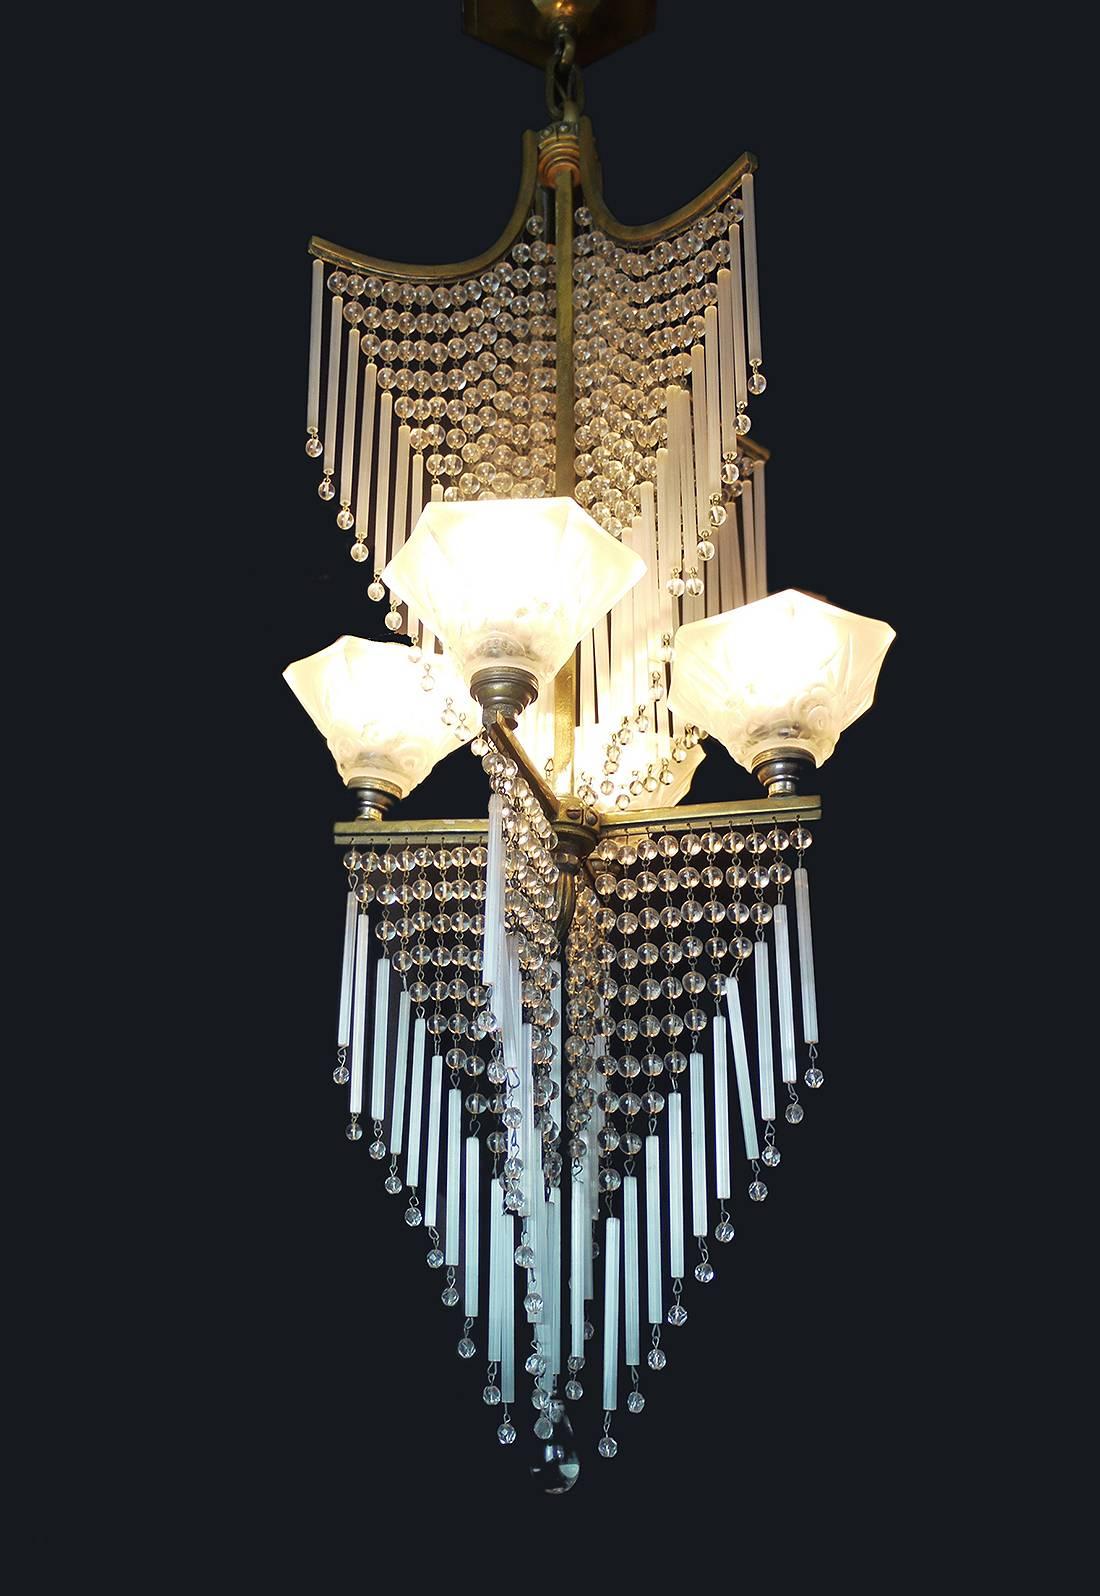 Elegant and very rare chandelier with four frosted shades in molded-pressed glass with glass beads and rods in the manner by Lorrain/Daum (Paul Daum & Pierre D'Avesn), Nancy, France. The chandelier is simply a jewel. The shades are signed.